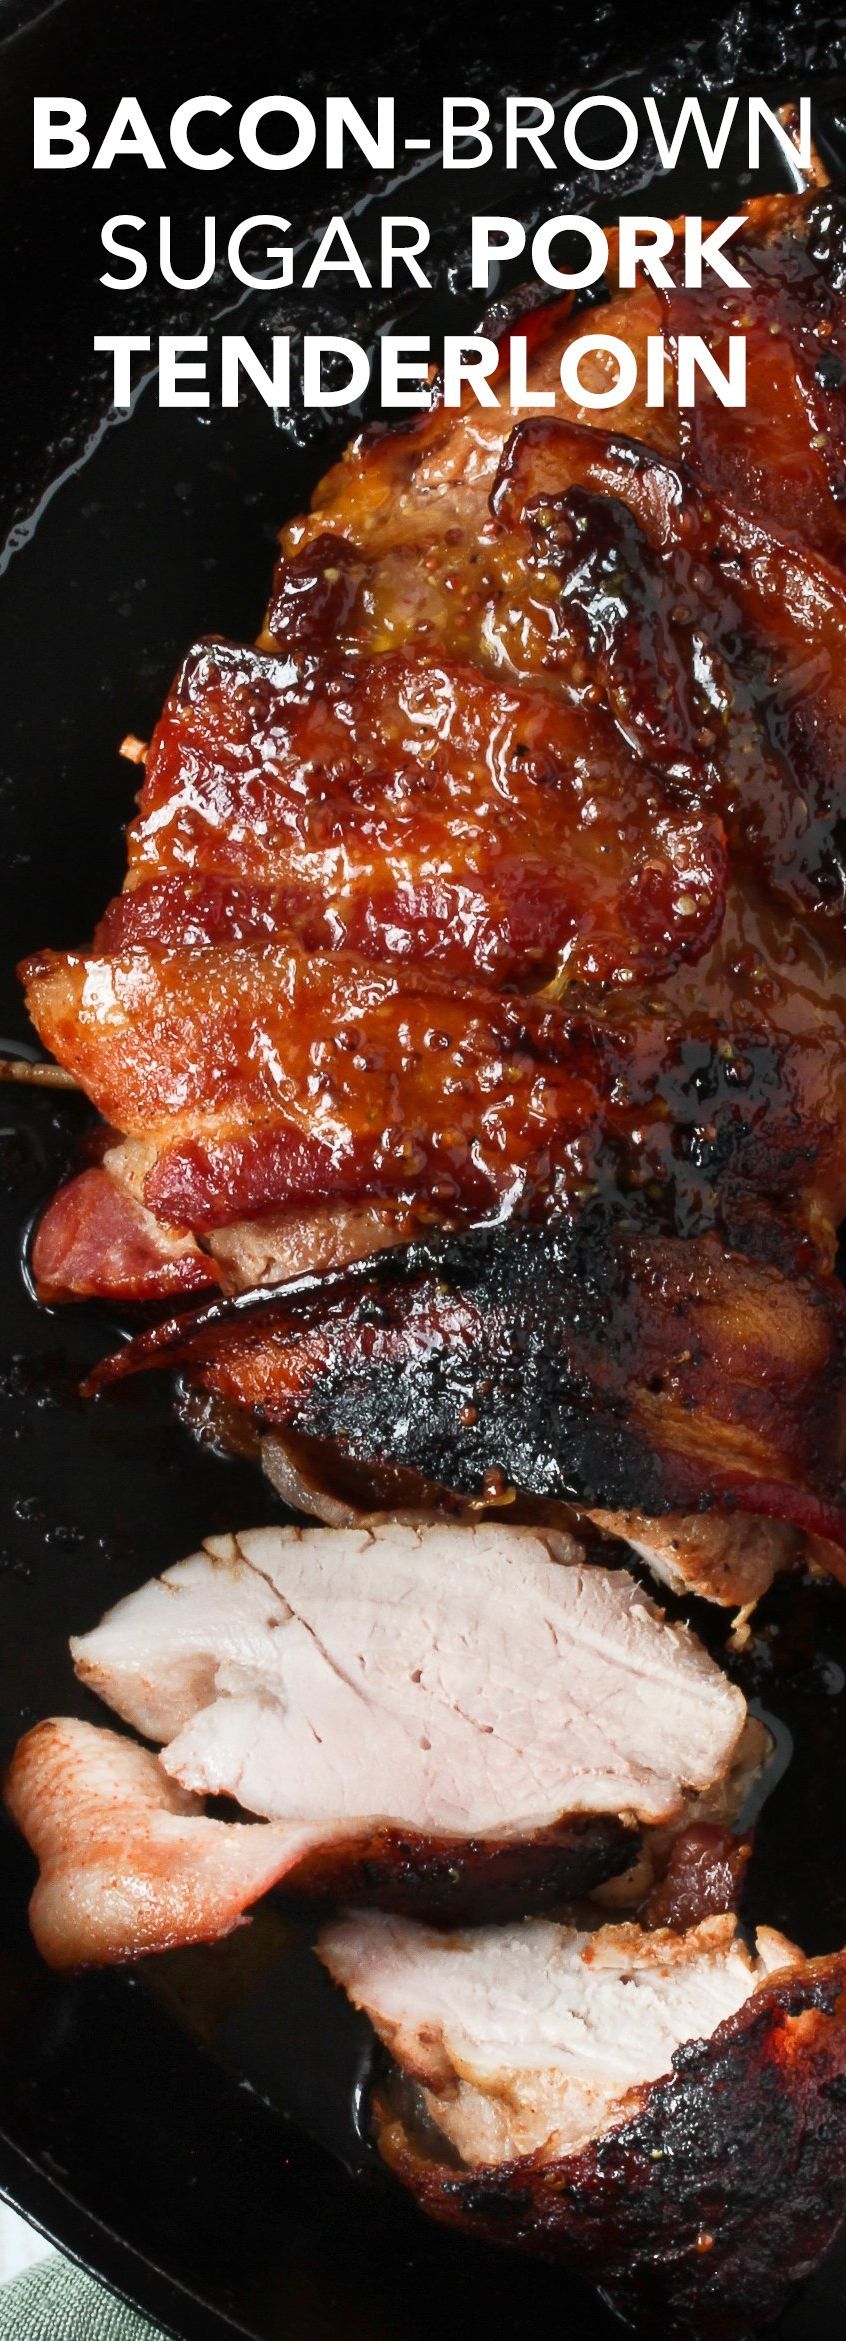 Bacon Brown Sugar Pork Tenderloin Recipe. Pork loin is so easy and quick to cook for a weeknight dinner, but why not kick your